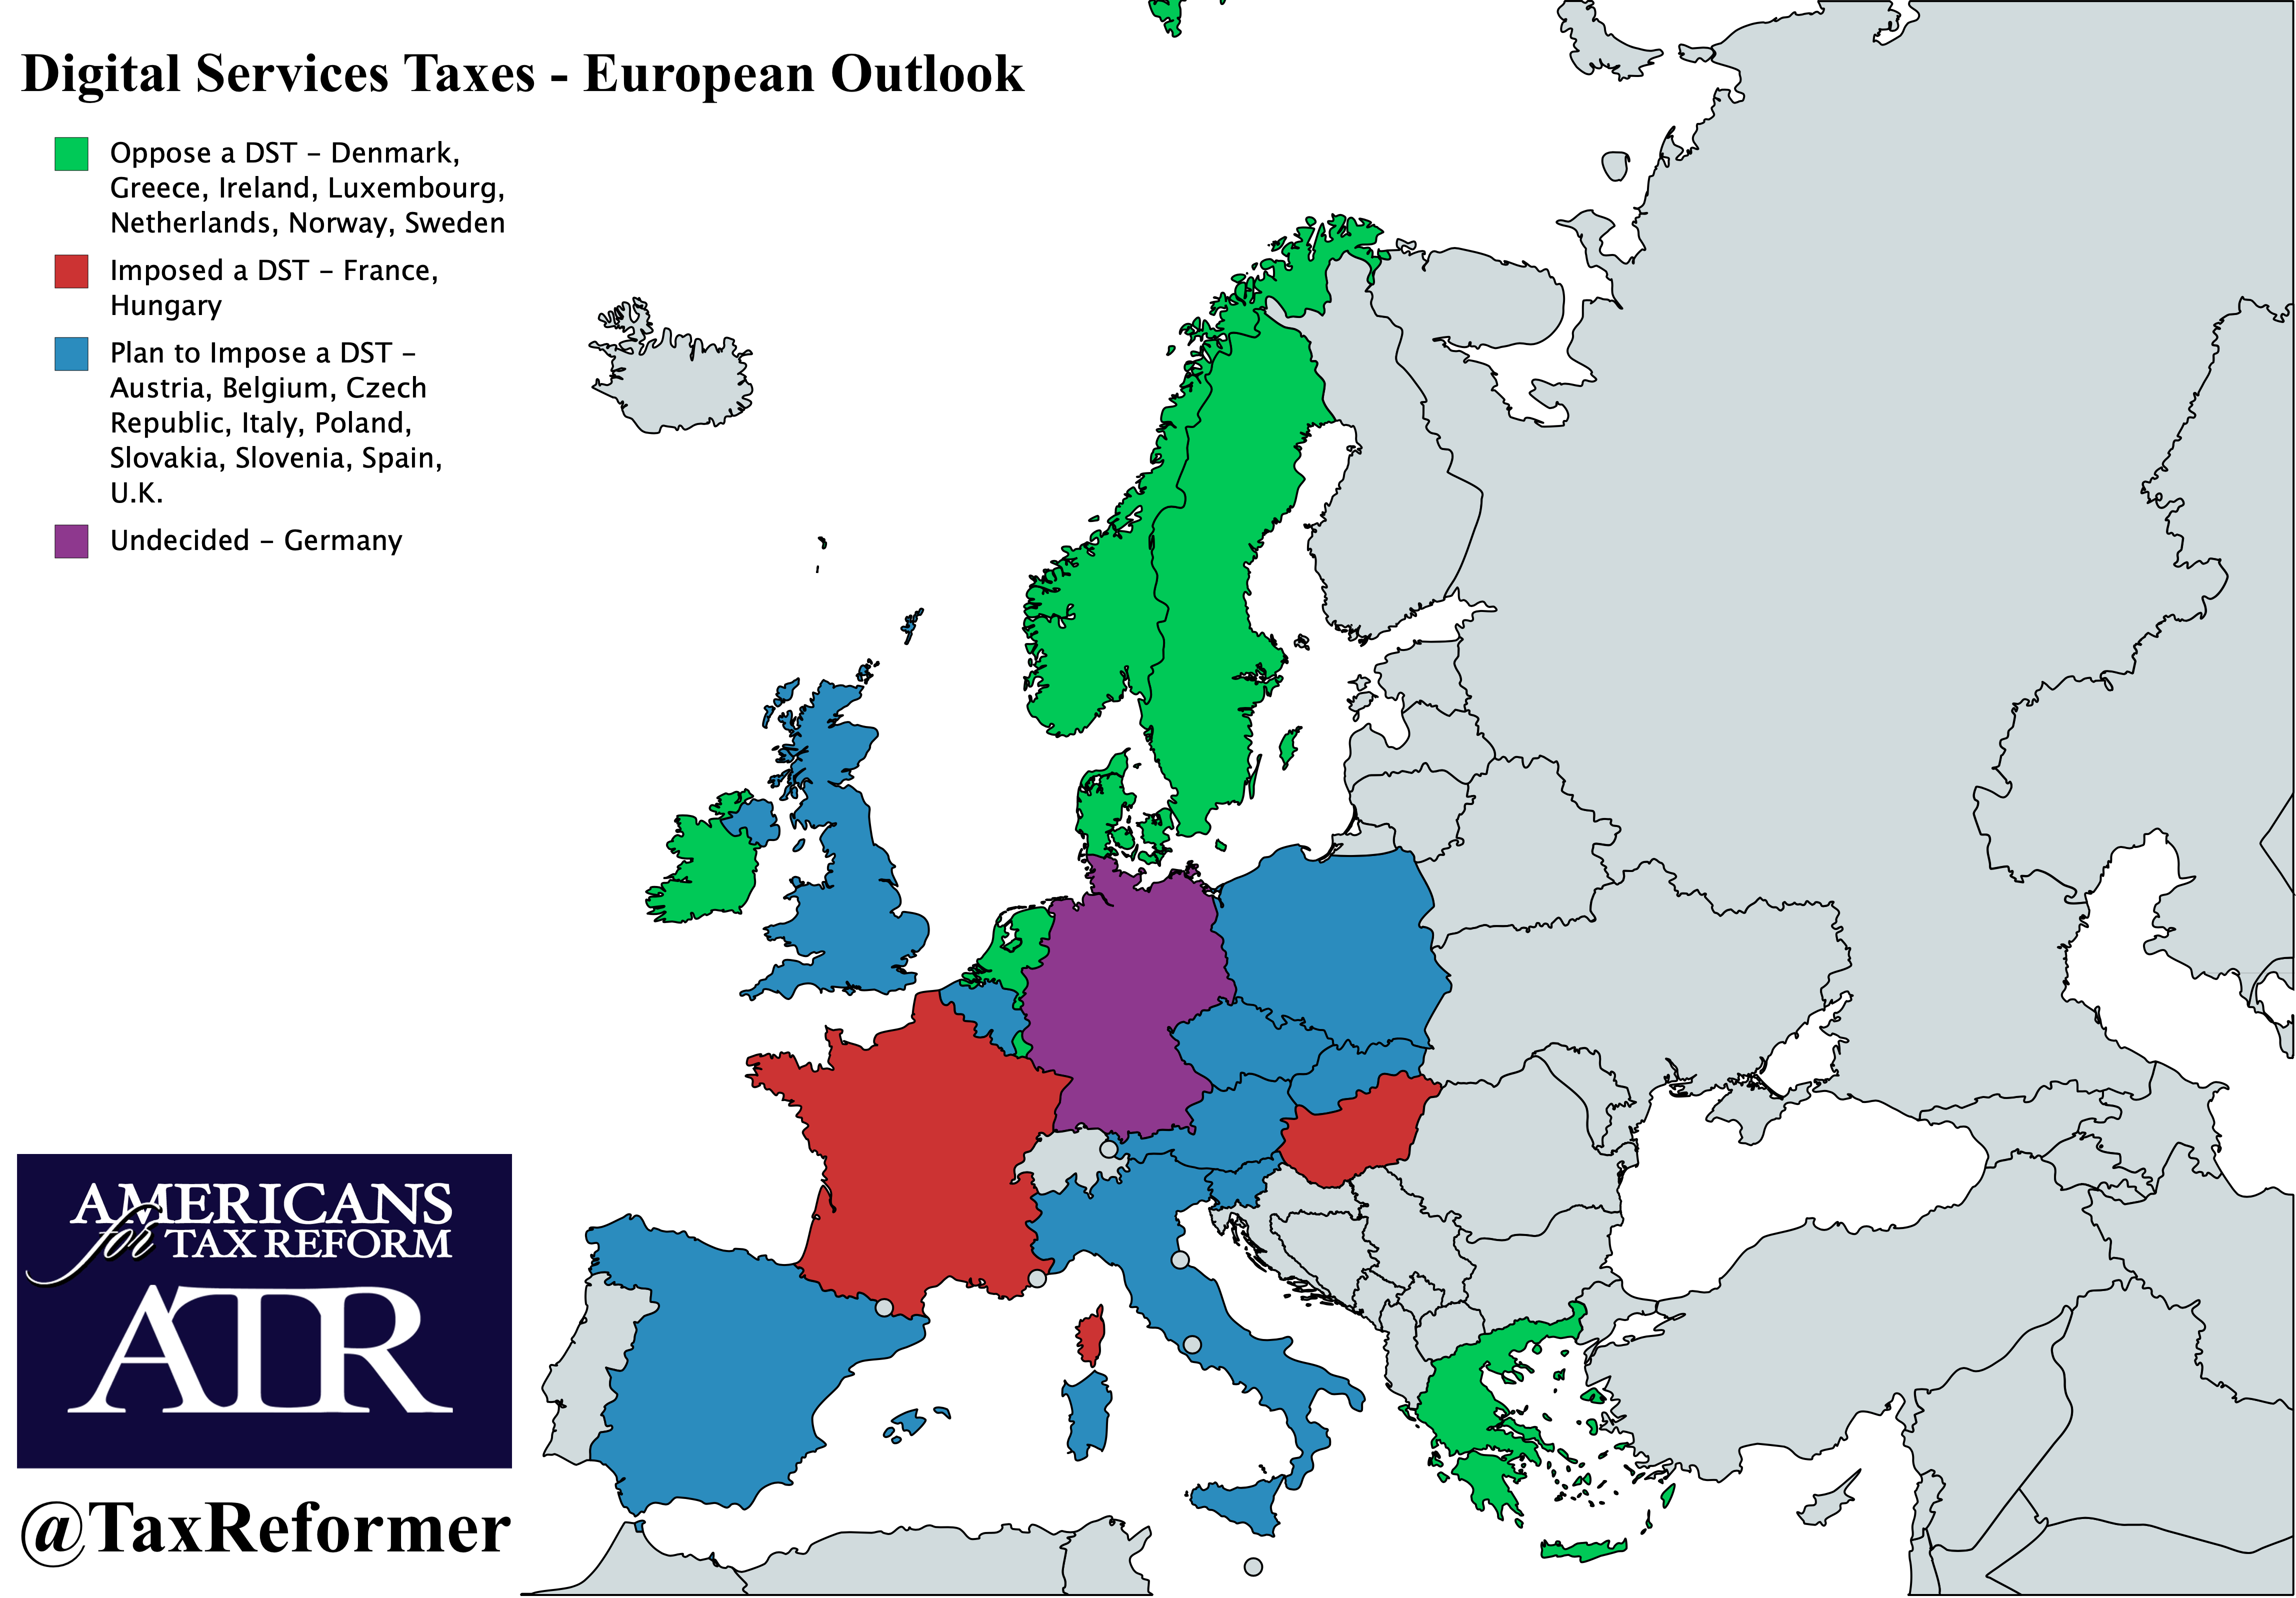 Digital Taxes Target American Companies in Europe and Around the World